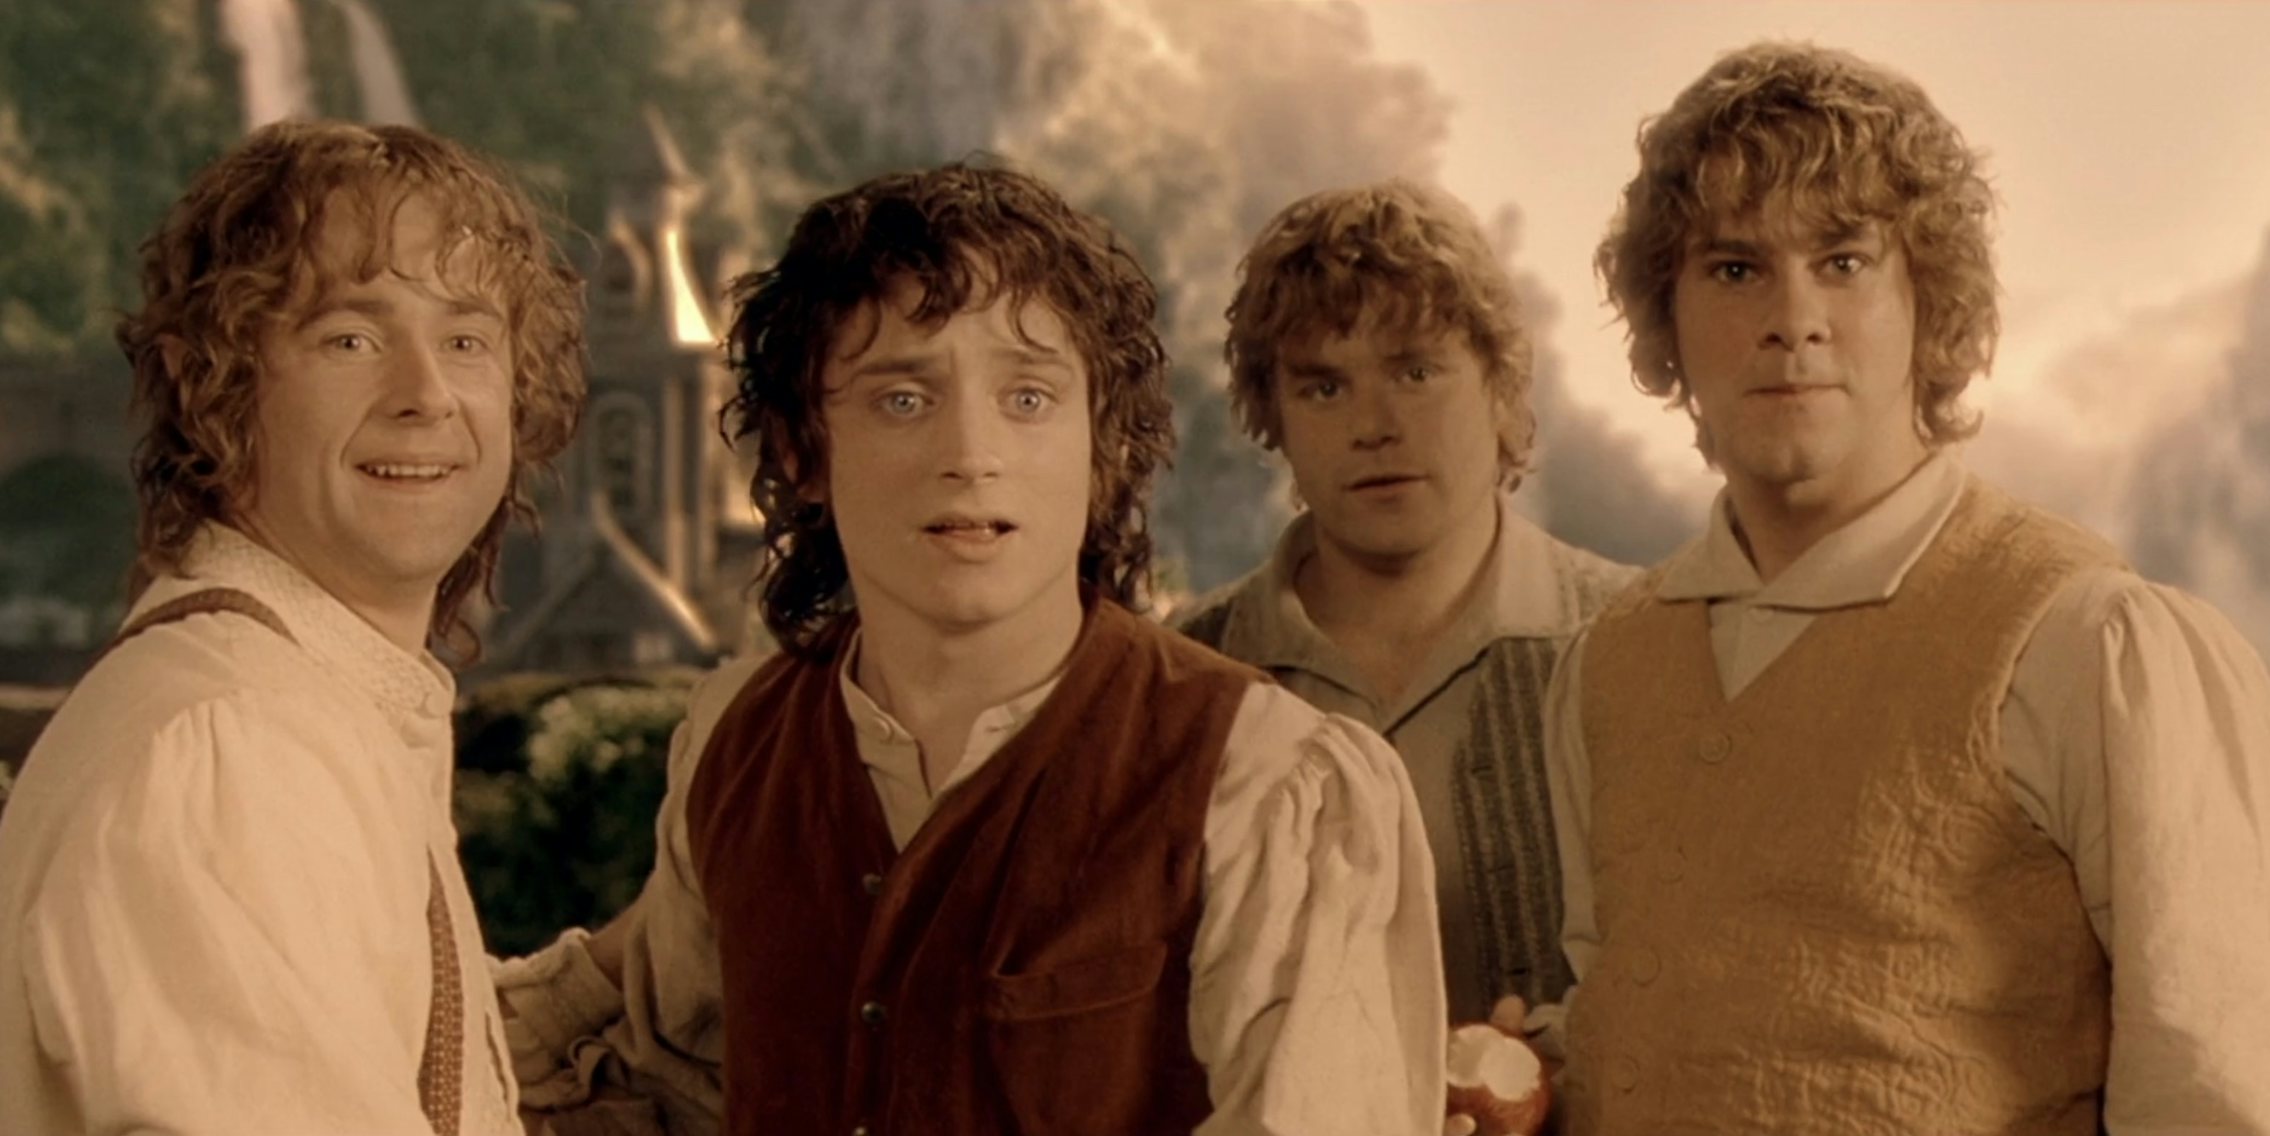 The Lord of the Rings' Fan Spots Incredible Movie Detail 20 Years Later